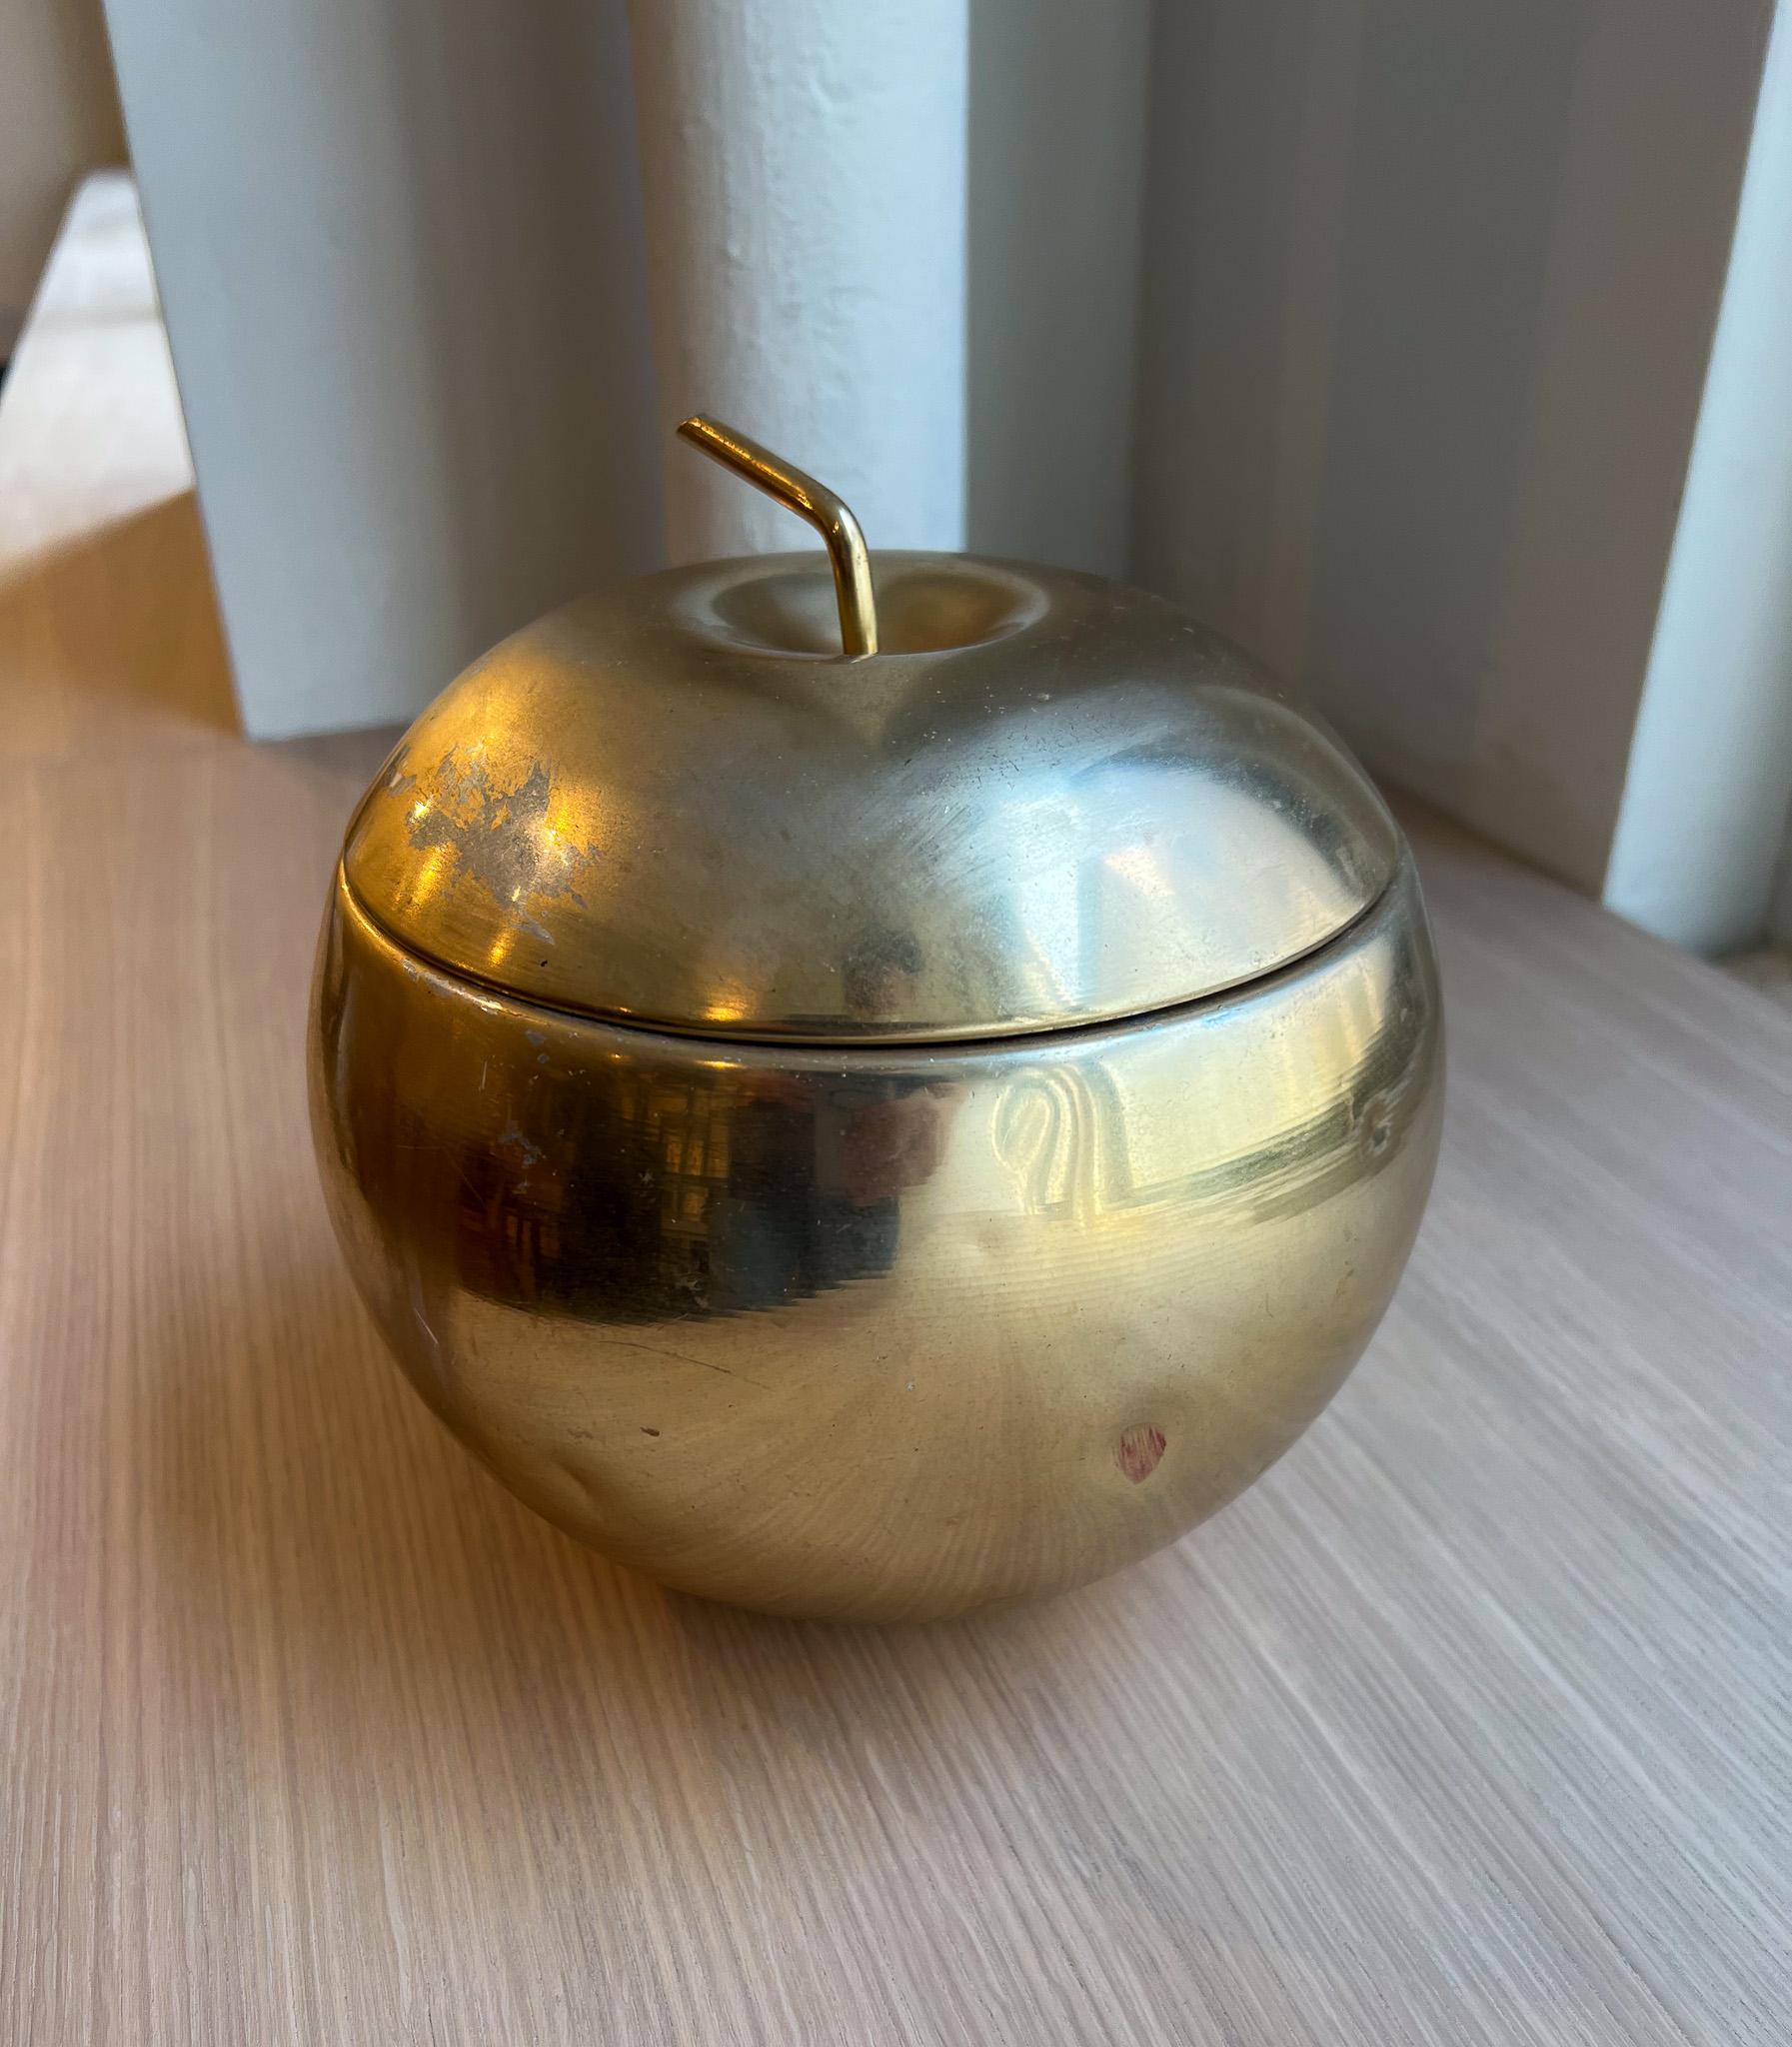 This mid-century modern apple ice bucket is made with a metal exterior and cream plastic interior. The metal has been newly polished, but shows moderate wear as shown in the images. The ice bucket has a sleek and elegant look and can be styled into